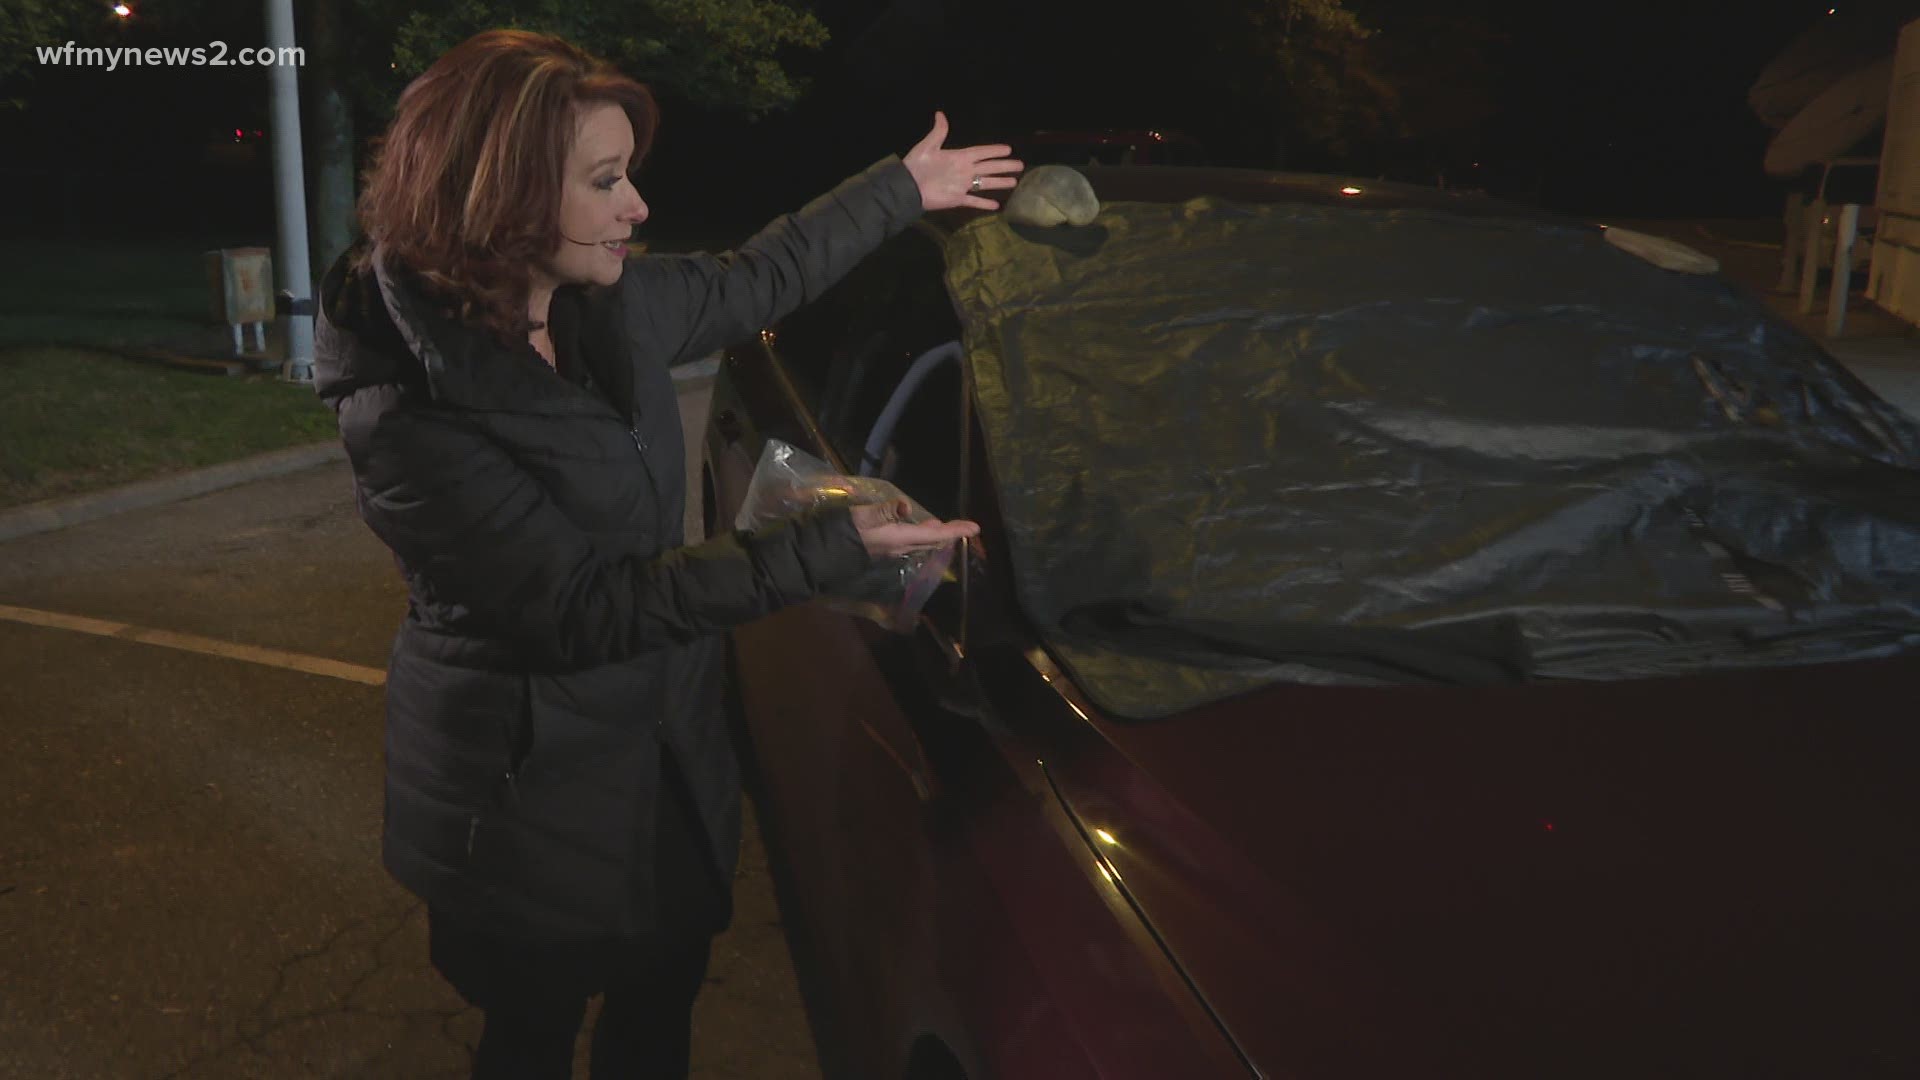 There are tricks you can use to keep your car road ready, despite winter weather.